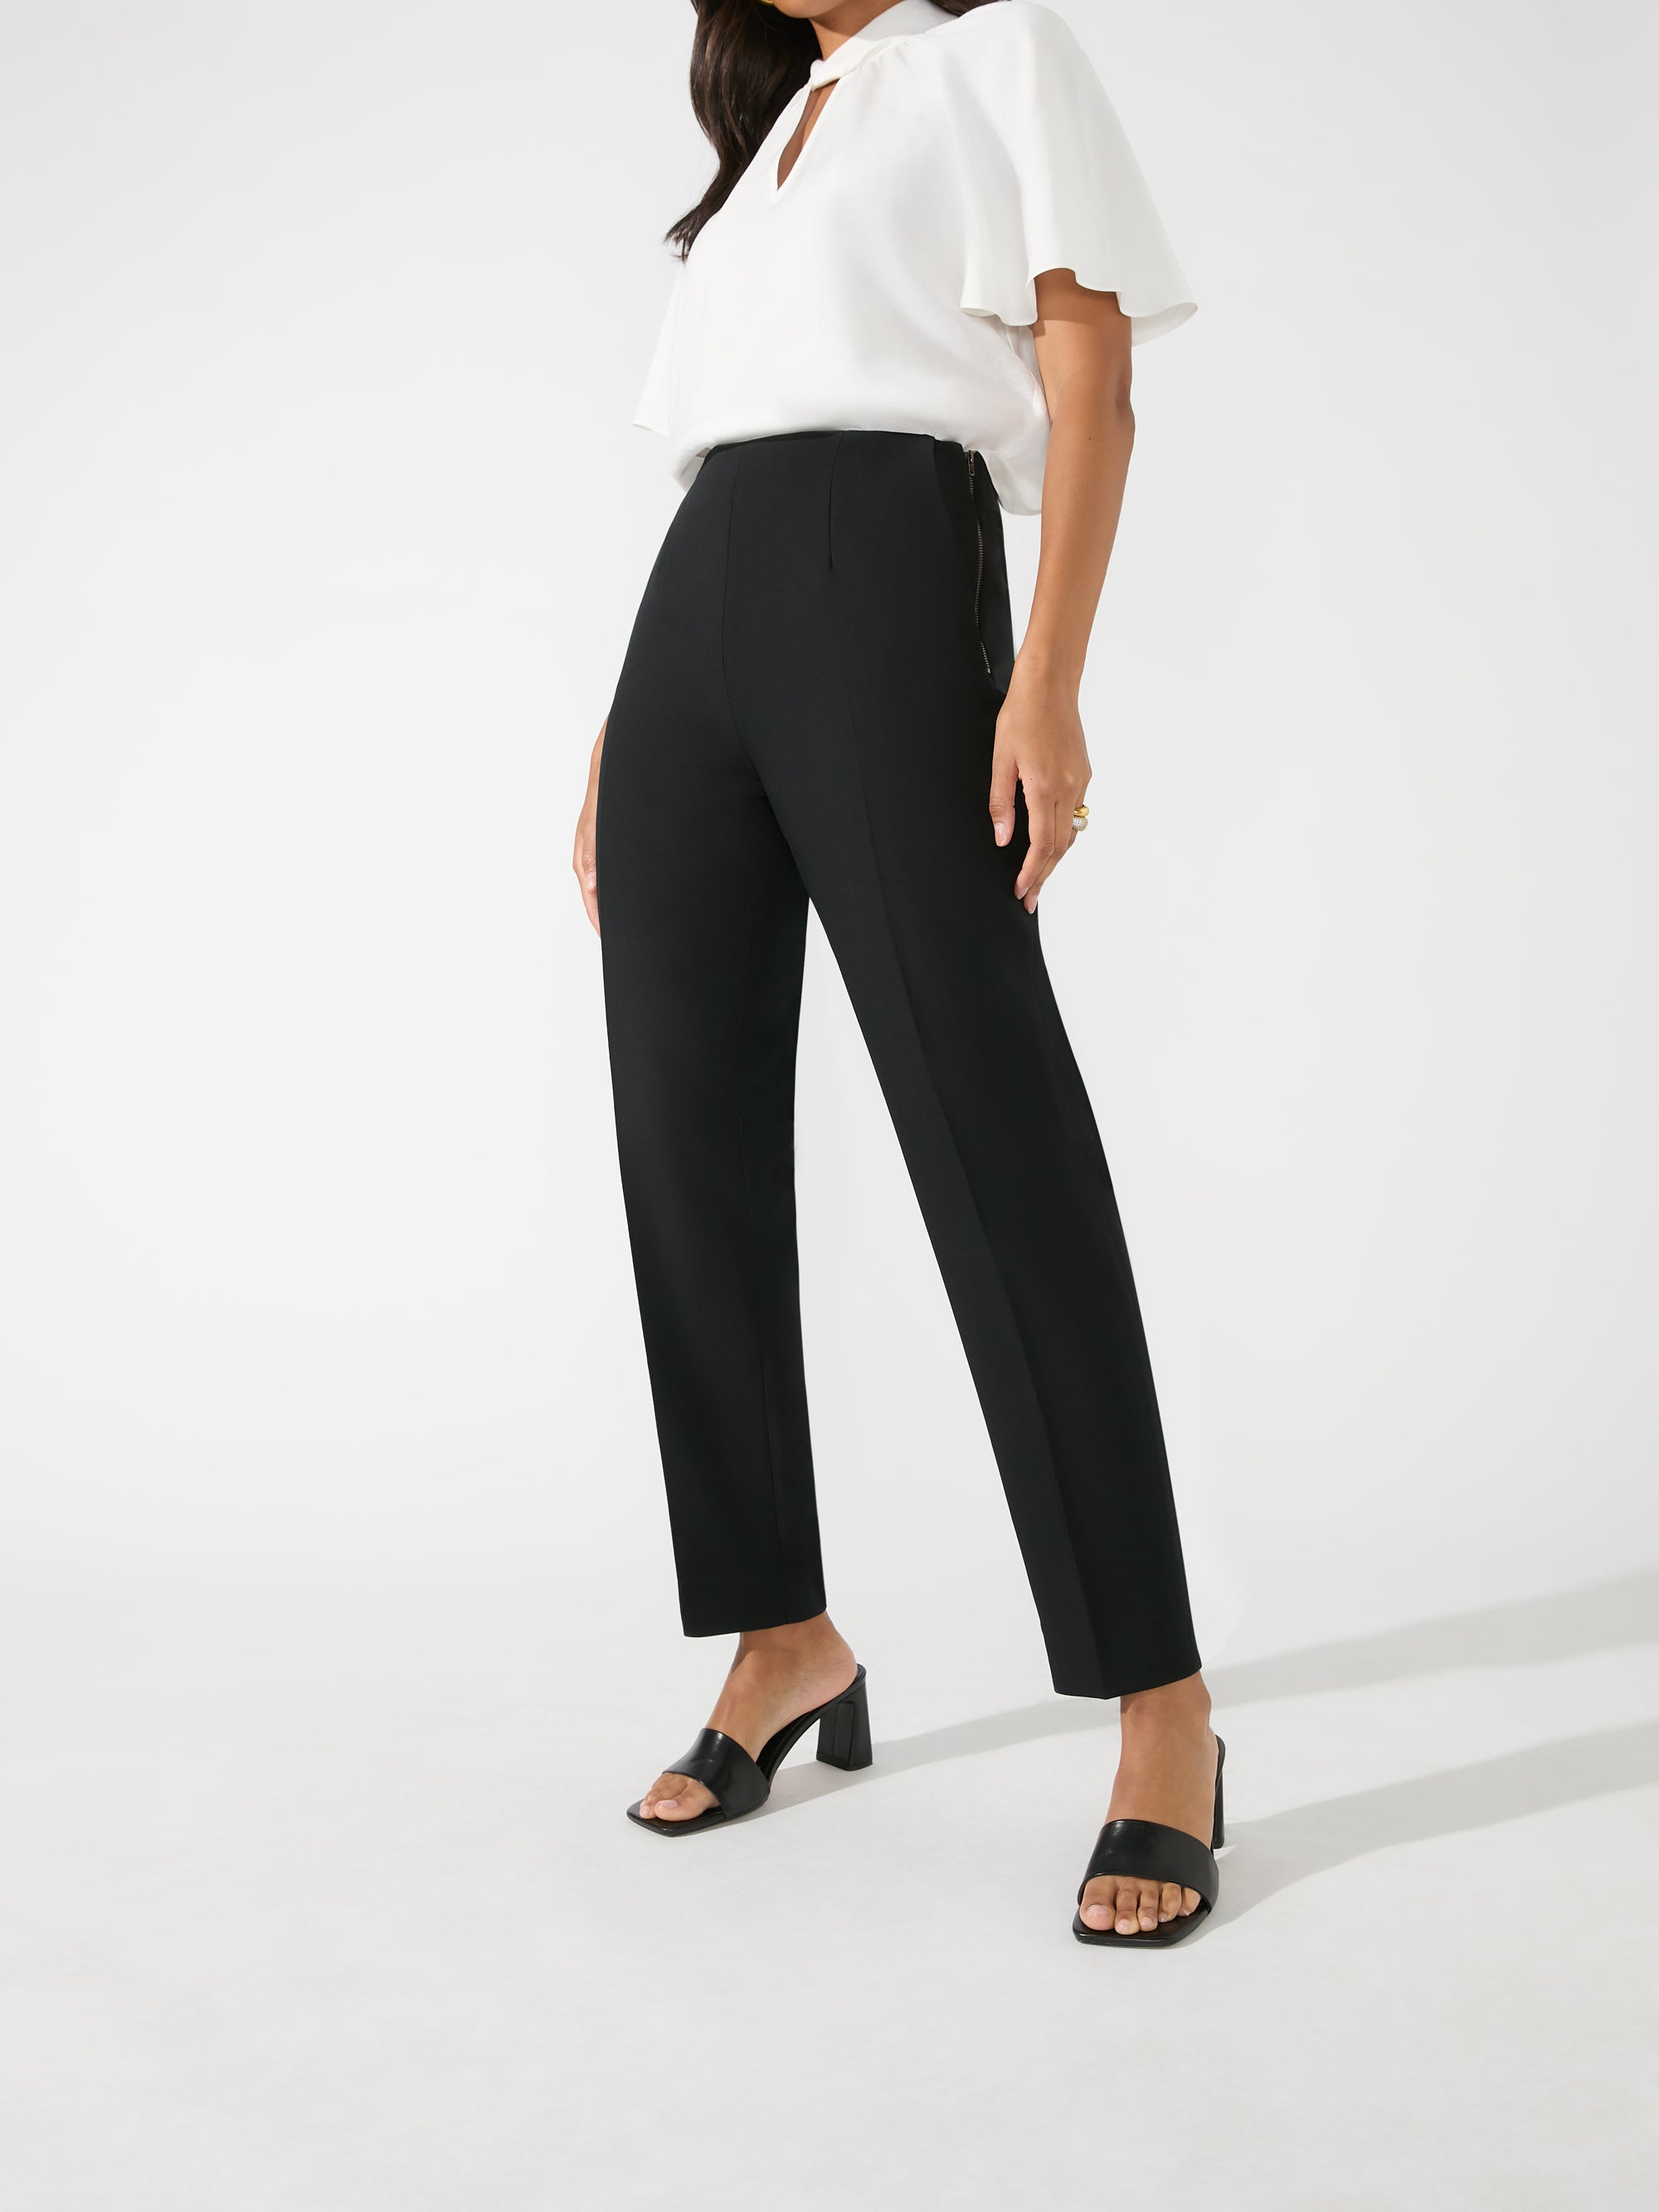 Marc Cain 'Sliven' Trousers With Side Zip| Womens Trousers  elizabeth-rose.com